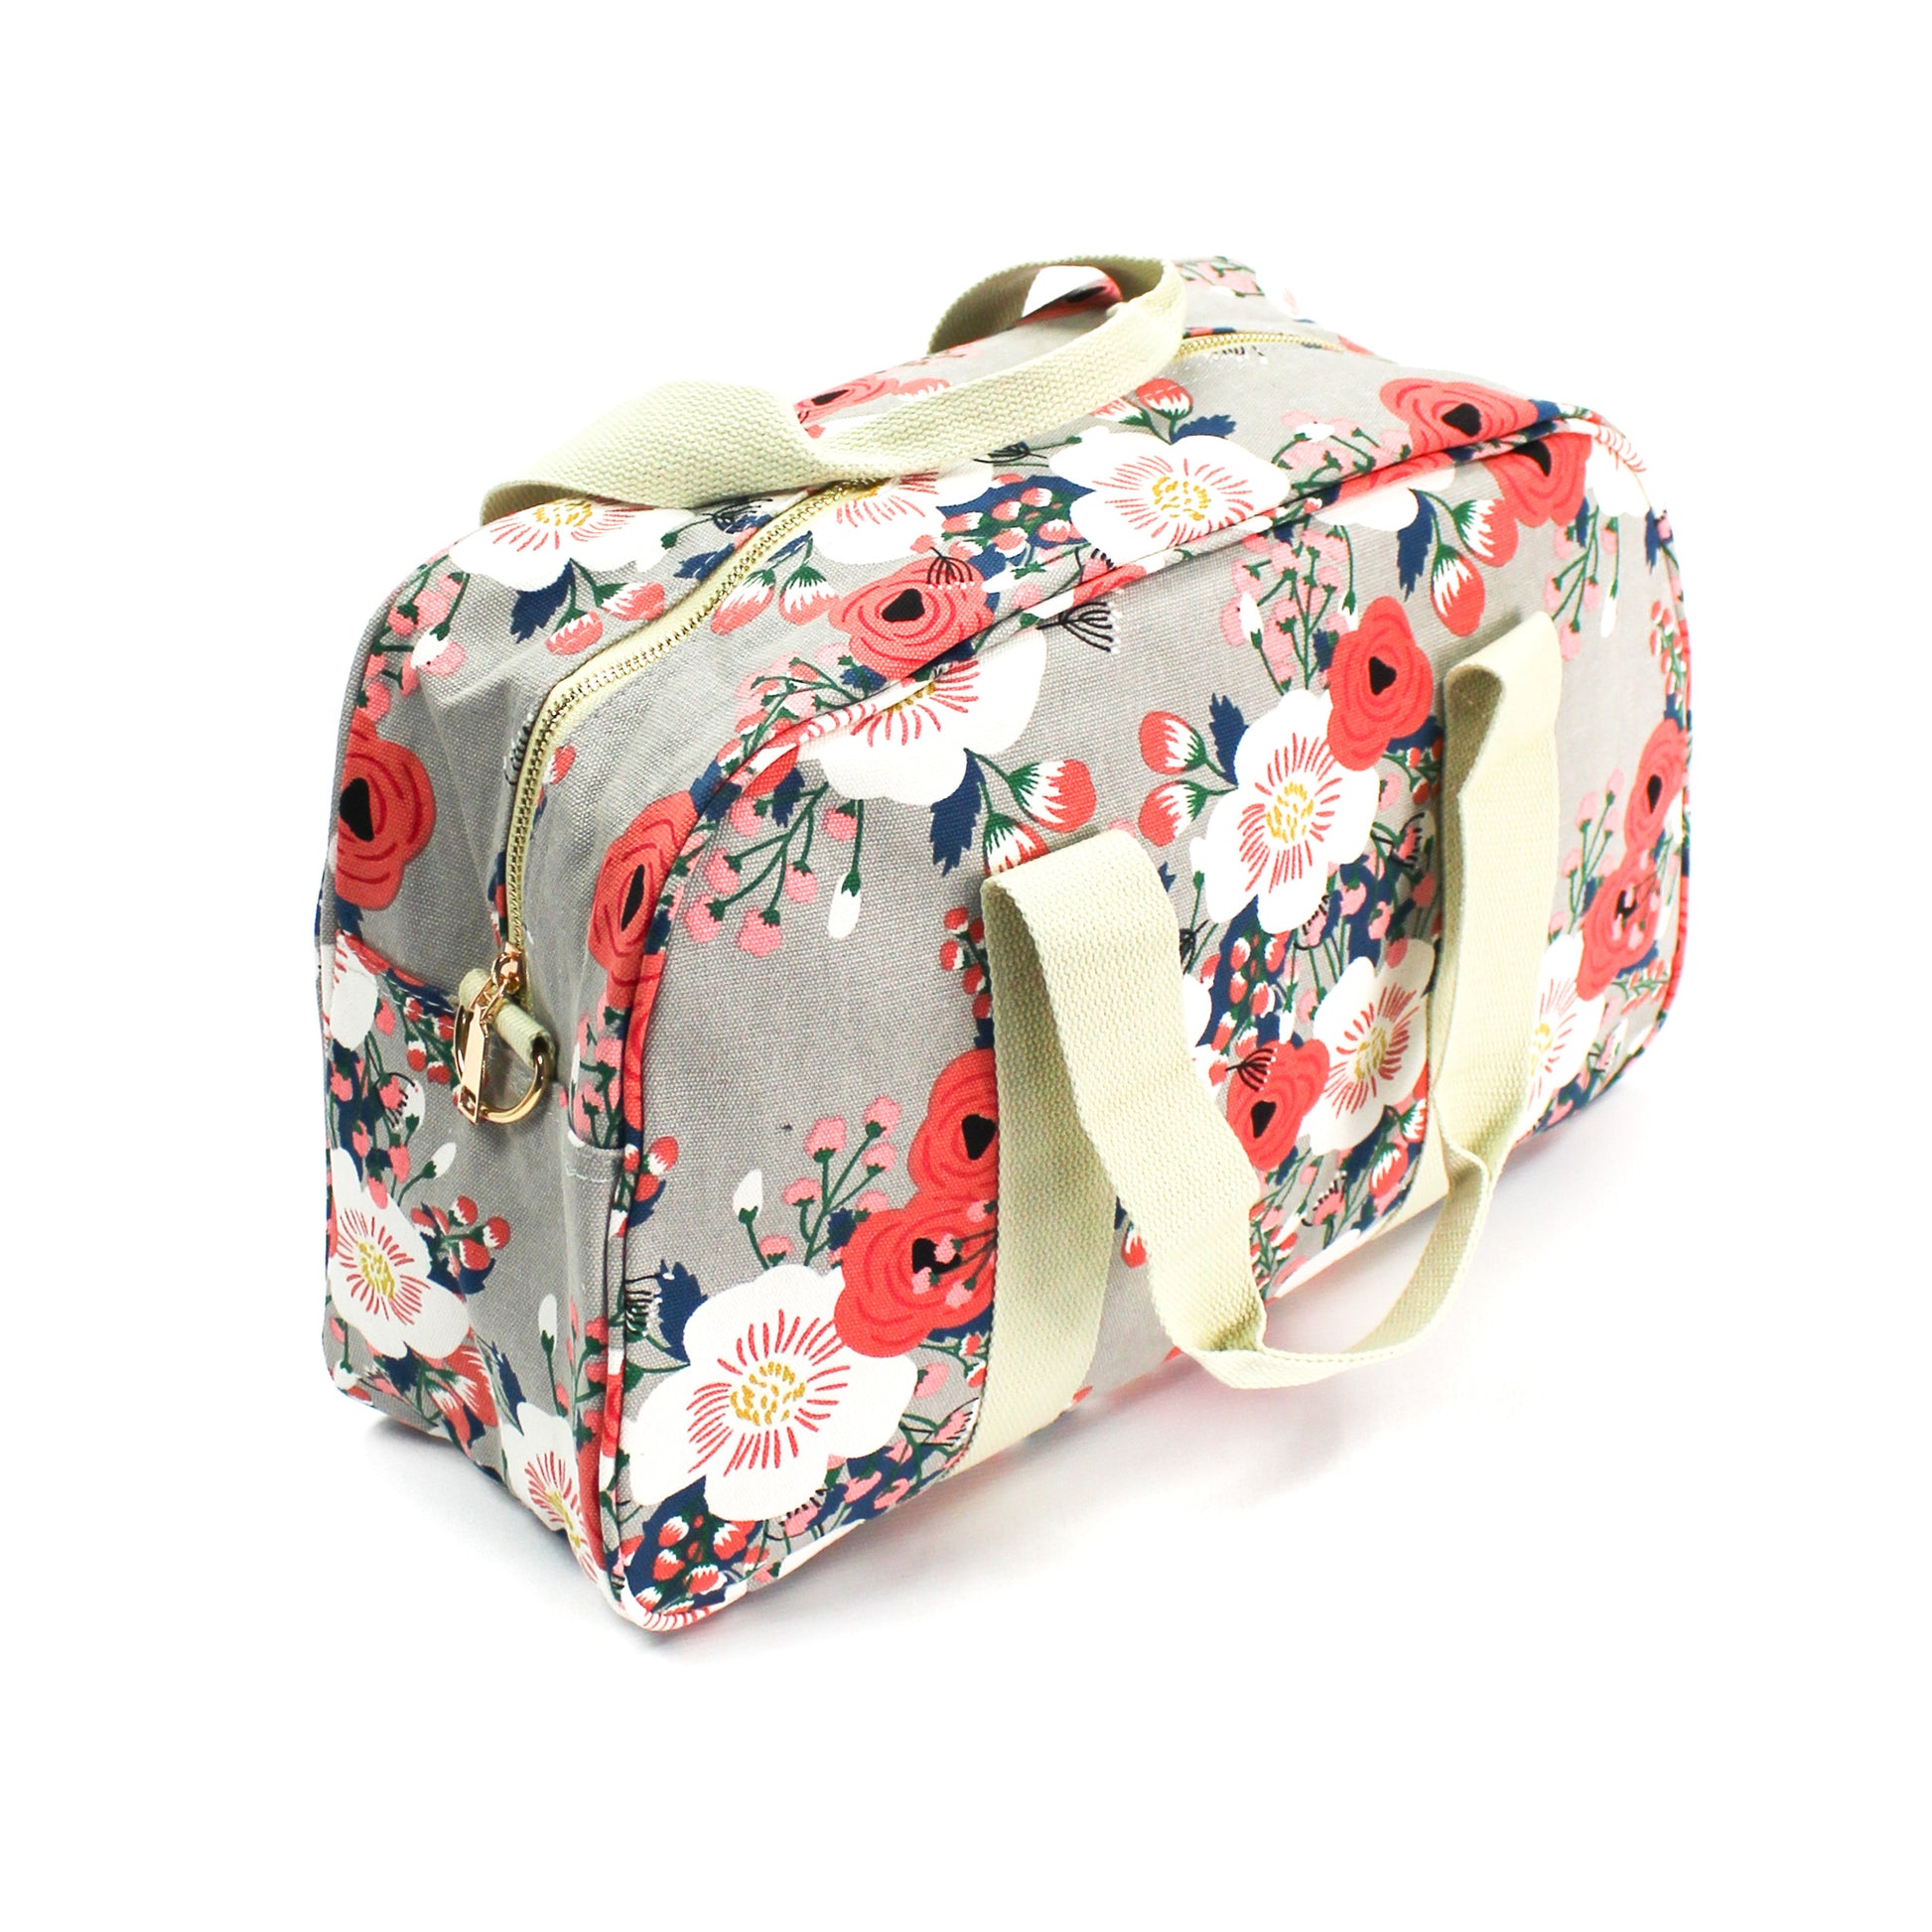 Gorgeous weekend bag with a large floral print featuring vintage rose and white flowers, on a solid grey coloured background